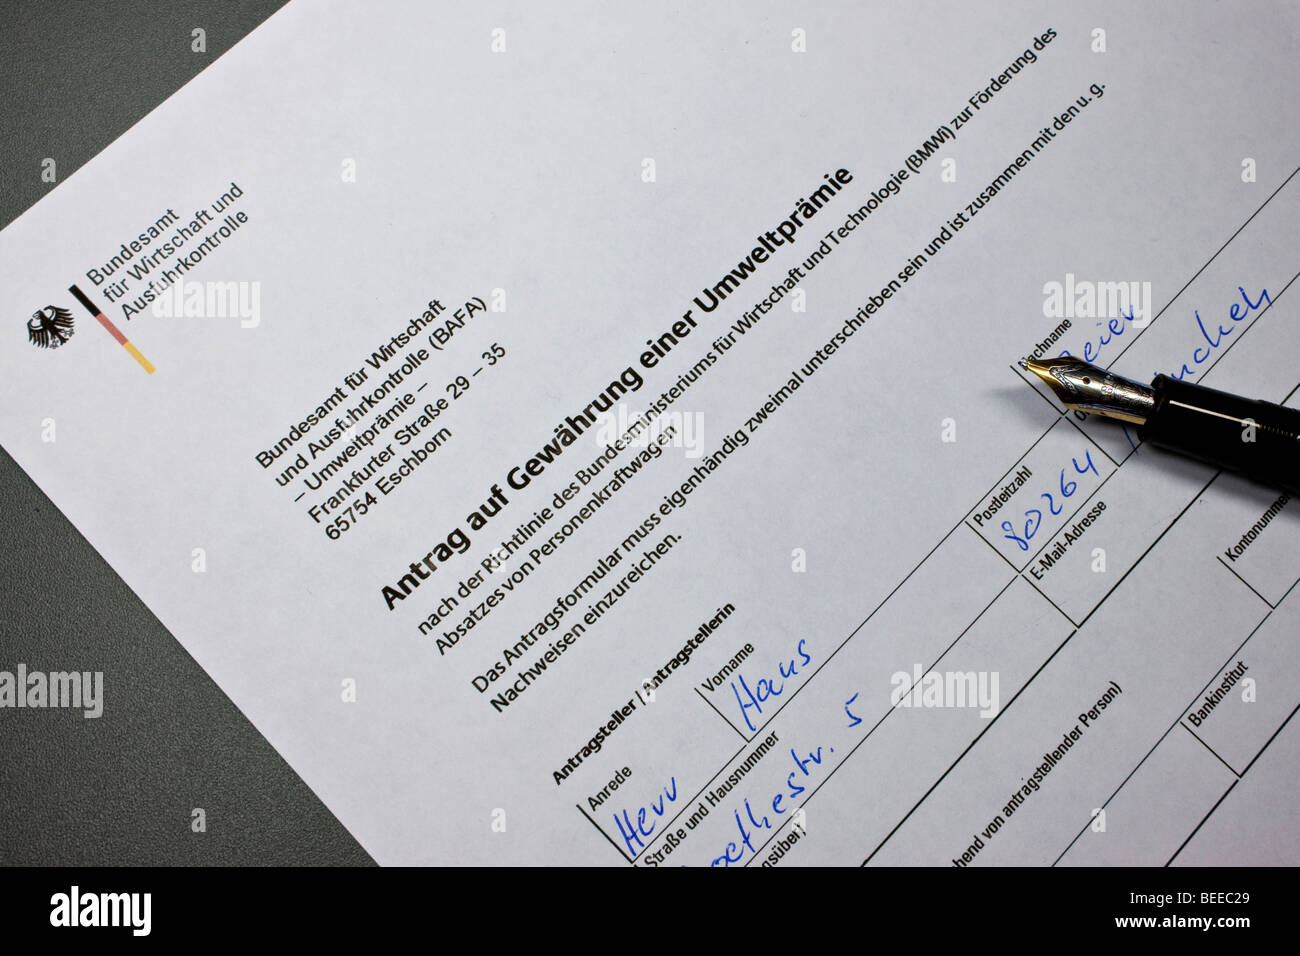 German form to apply for the environmental bonus or scrapping bonus from the German Federal Office of Economics and Export Cont Stock Photo